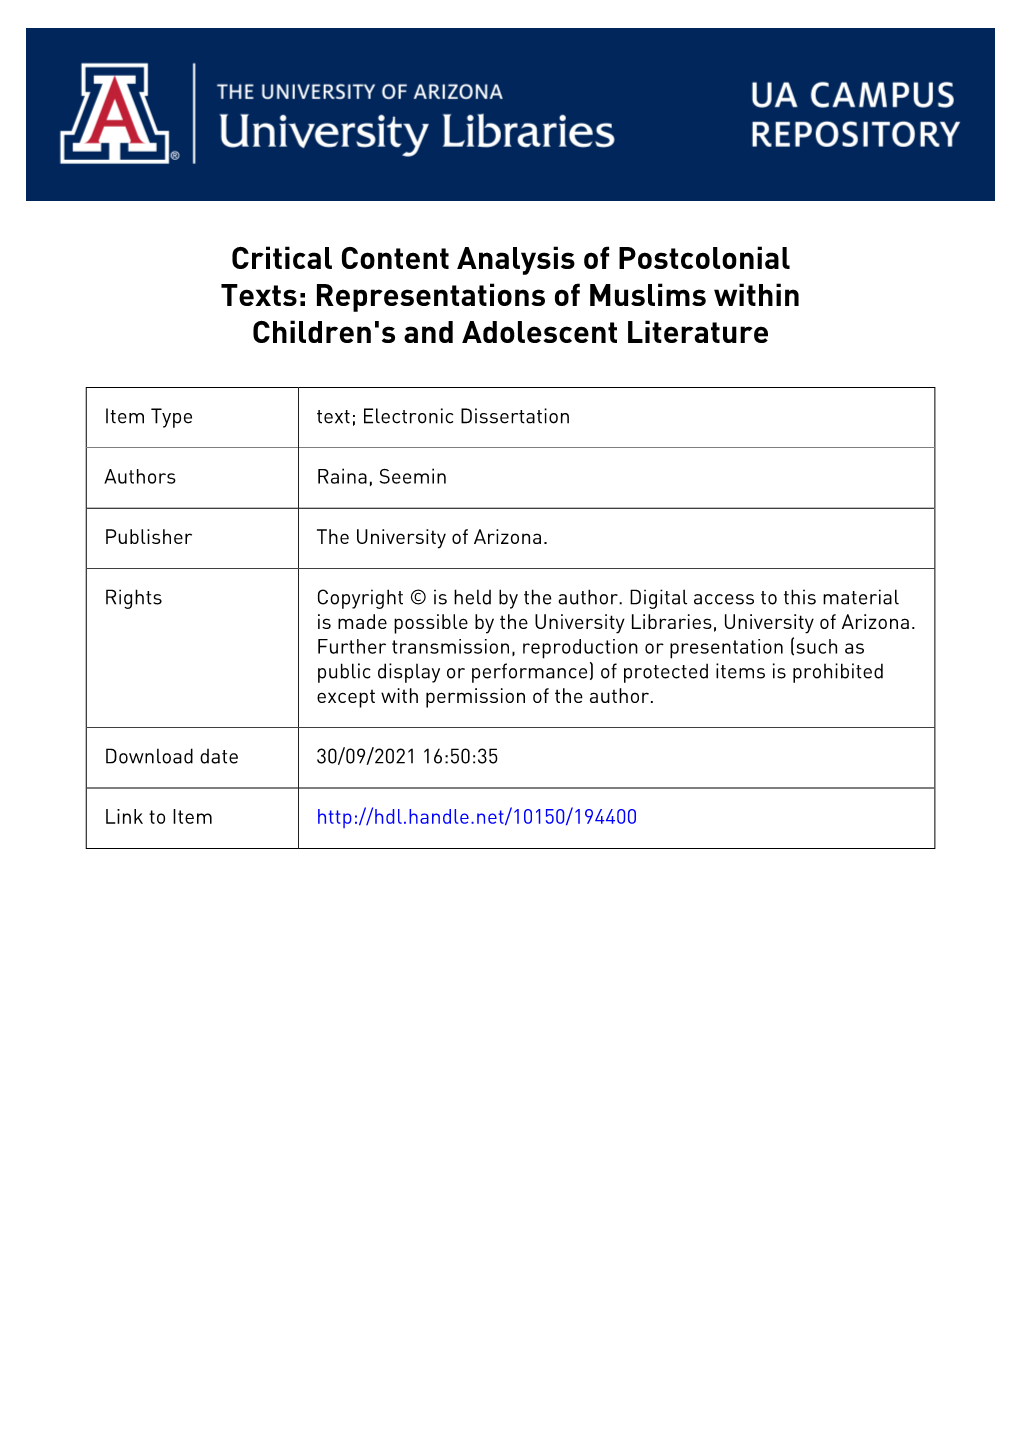 Critical Content Analysis of Postcolonial Texts: Representations of Muslims Within Children's and Adolescent Literature